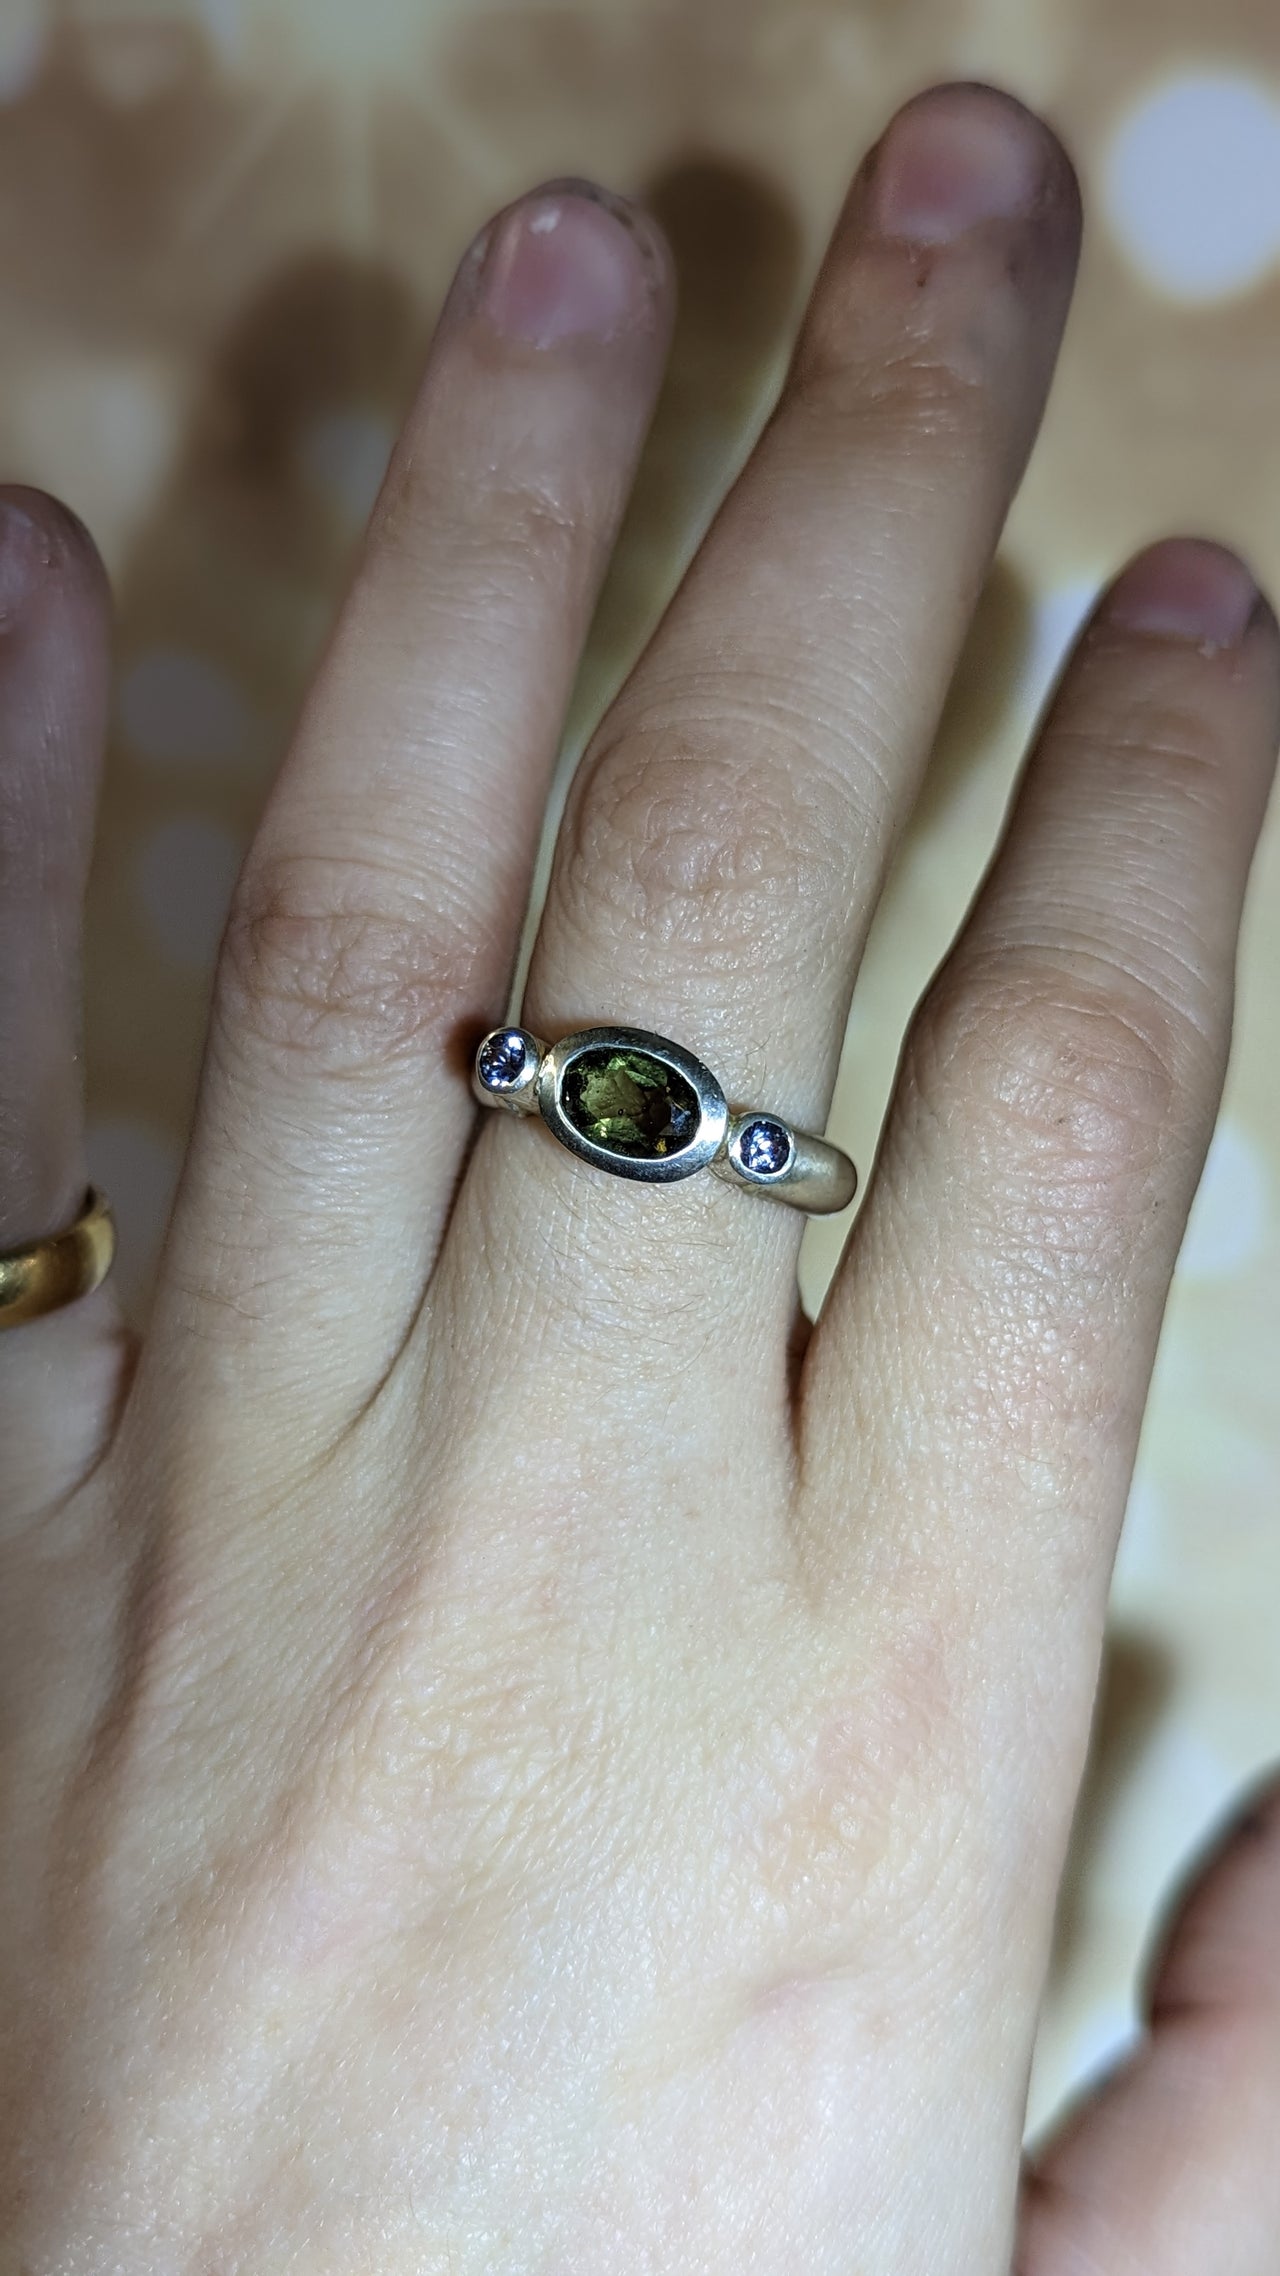 3-Stone Silver Ring with Moldavite and Spinel